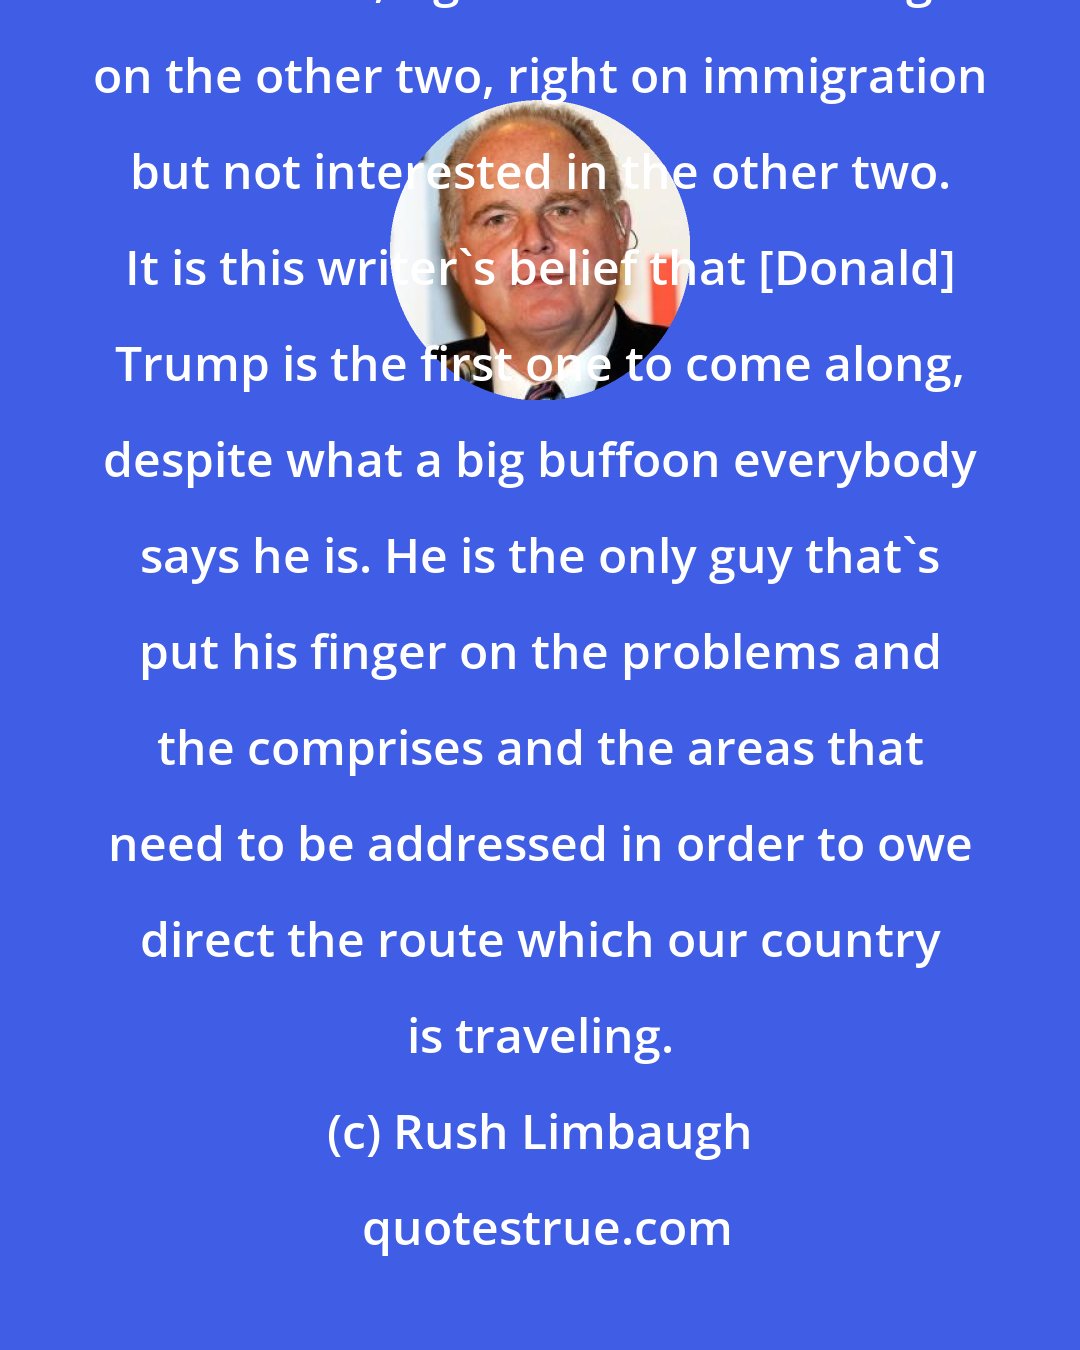 Rush Limbaugh: There have been candidates who've been right on trade but wrong on the other two, right on war but wrong on the other two, right on immigration but not interested in the other two. It is this writer's belief that [Donald] Trump is the first one to come along, despite what a big buffoon everybody says he is. He is the only guy that's put his finger on the problems and the comprises and the areas that need to be addressed in order to owe direct the route which our country is traveling.